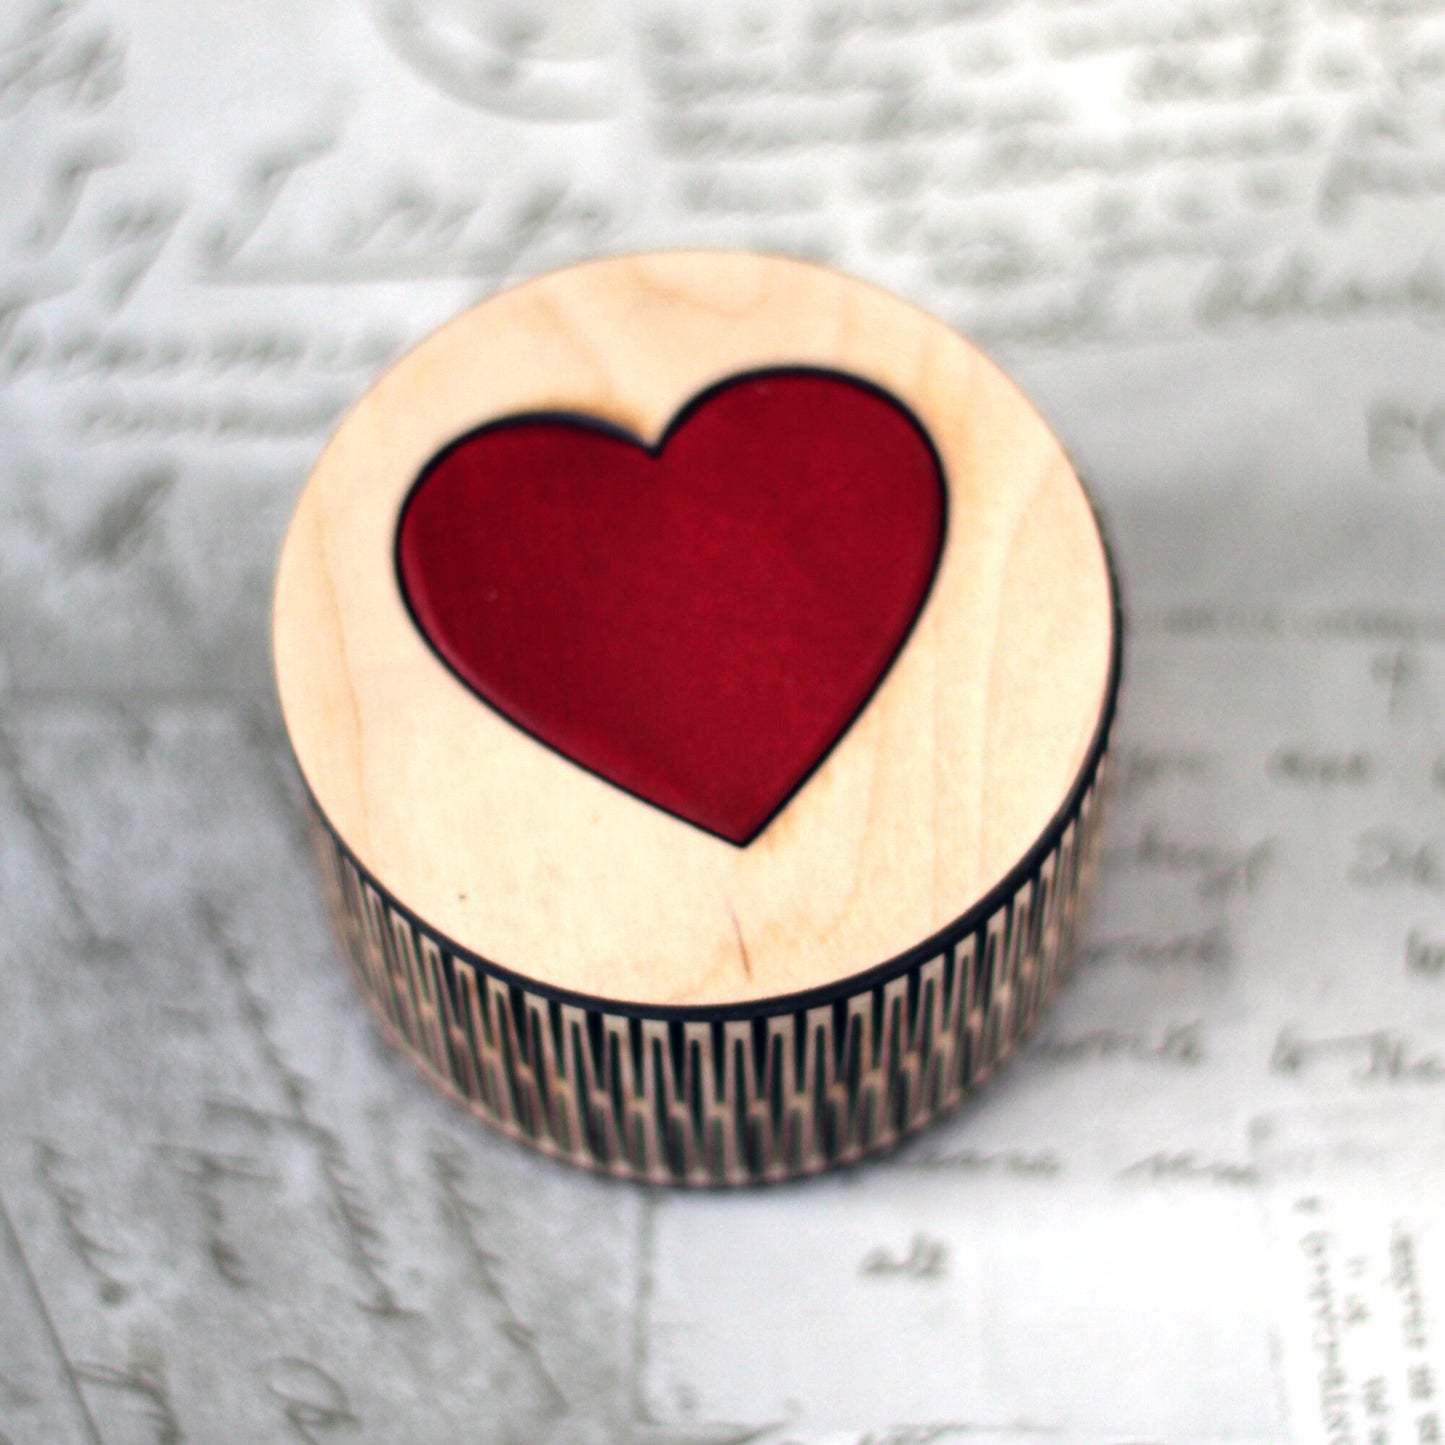 Red Heart Design Small wooden trinket box with living hinge. Use for keepsakes and treasures, a lovely Valentine or anniversary gift